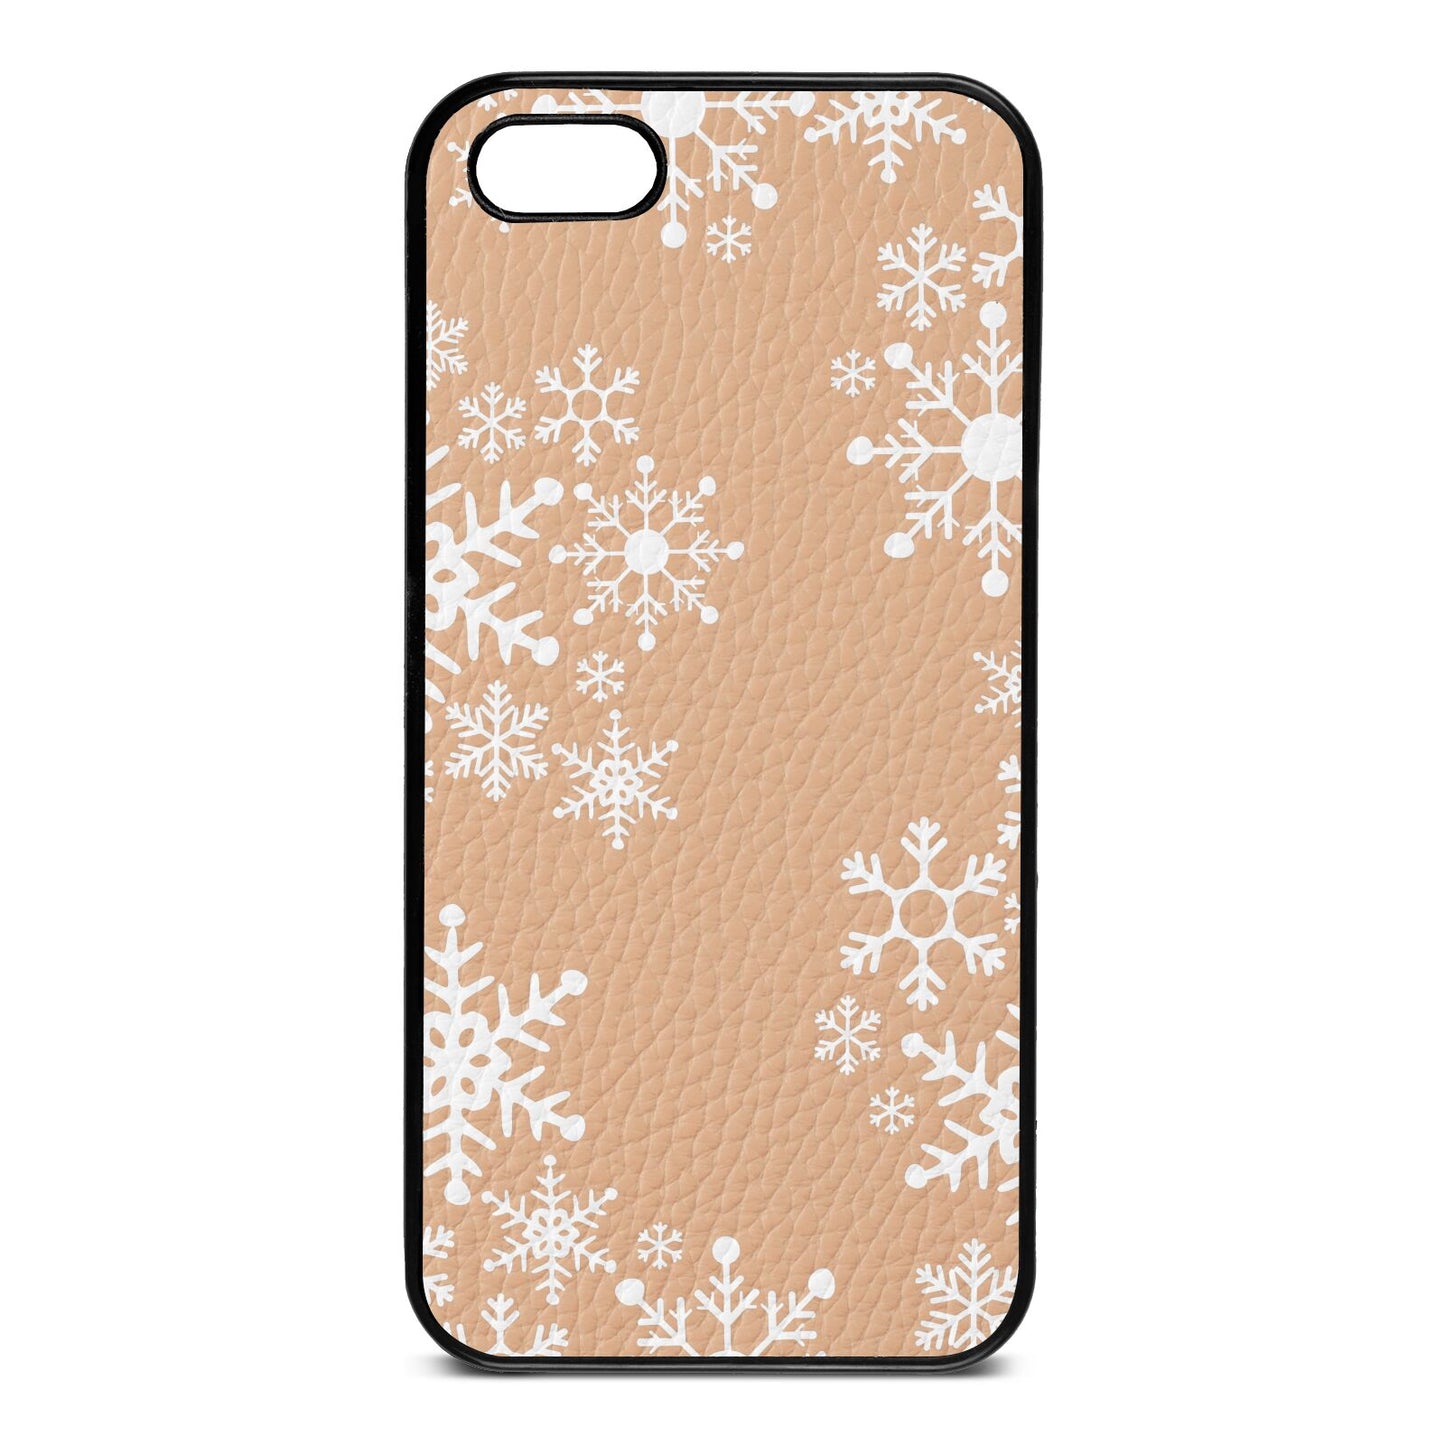 Snowflake Nude Pebble Leather iPhone 5 Case